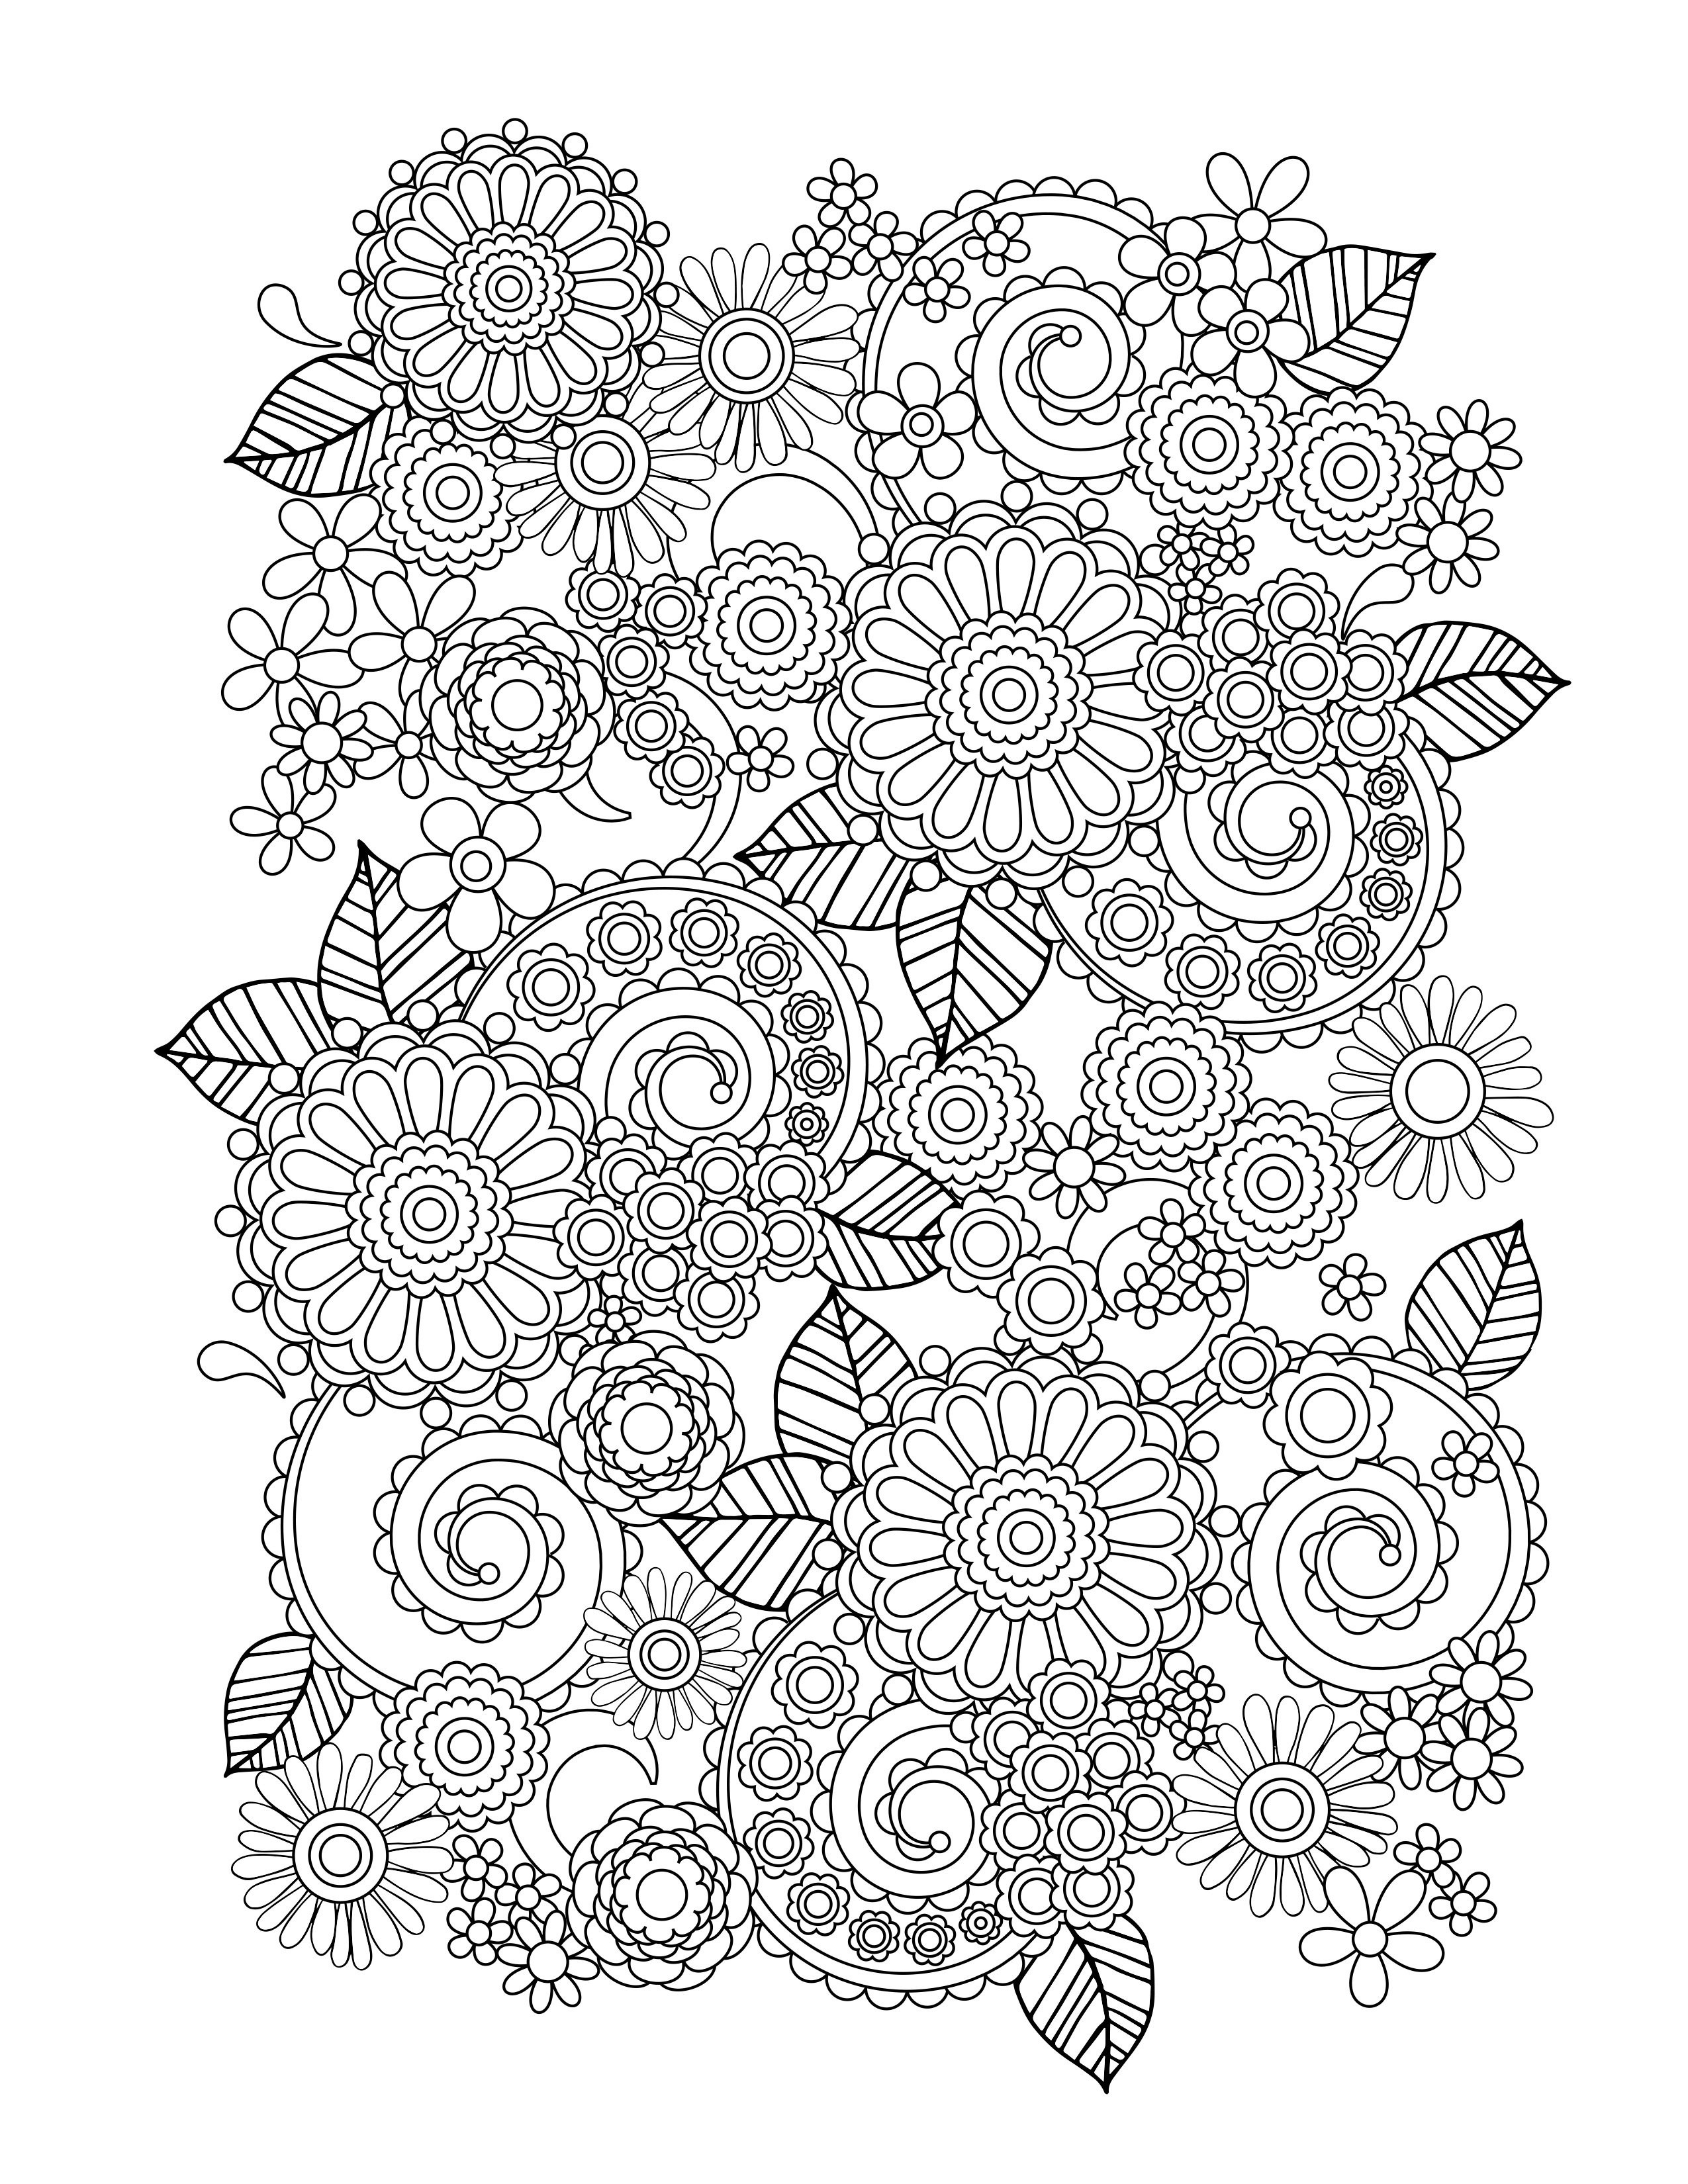 Free Flower Coloring Pages For Adults
 Flower Coloring Pages for Adults Best Coloring Pages For